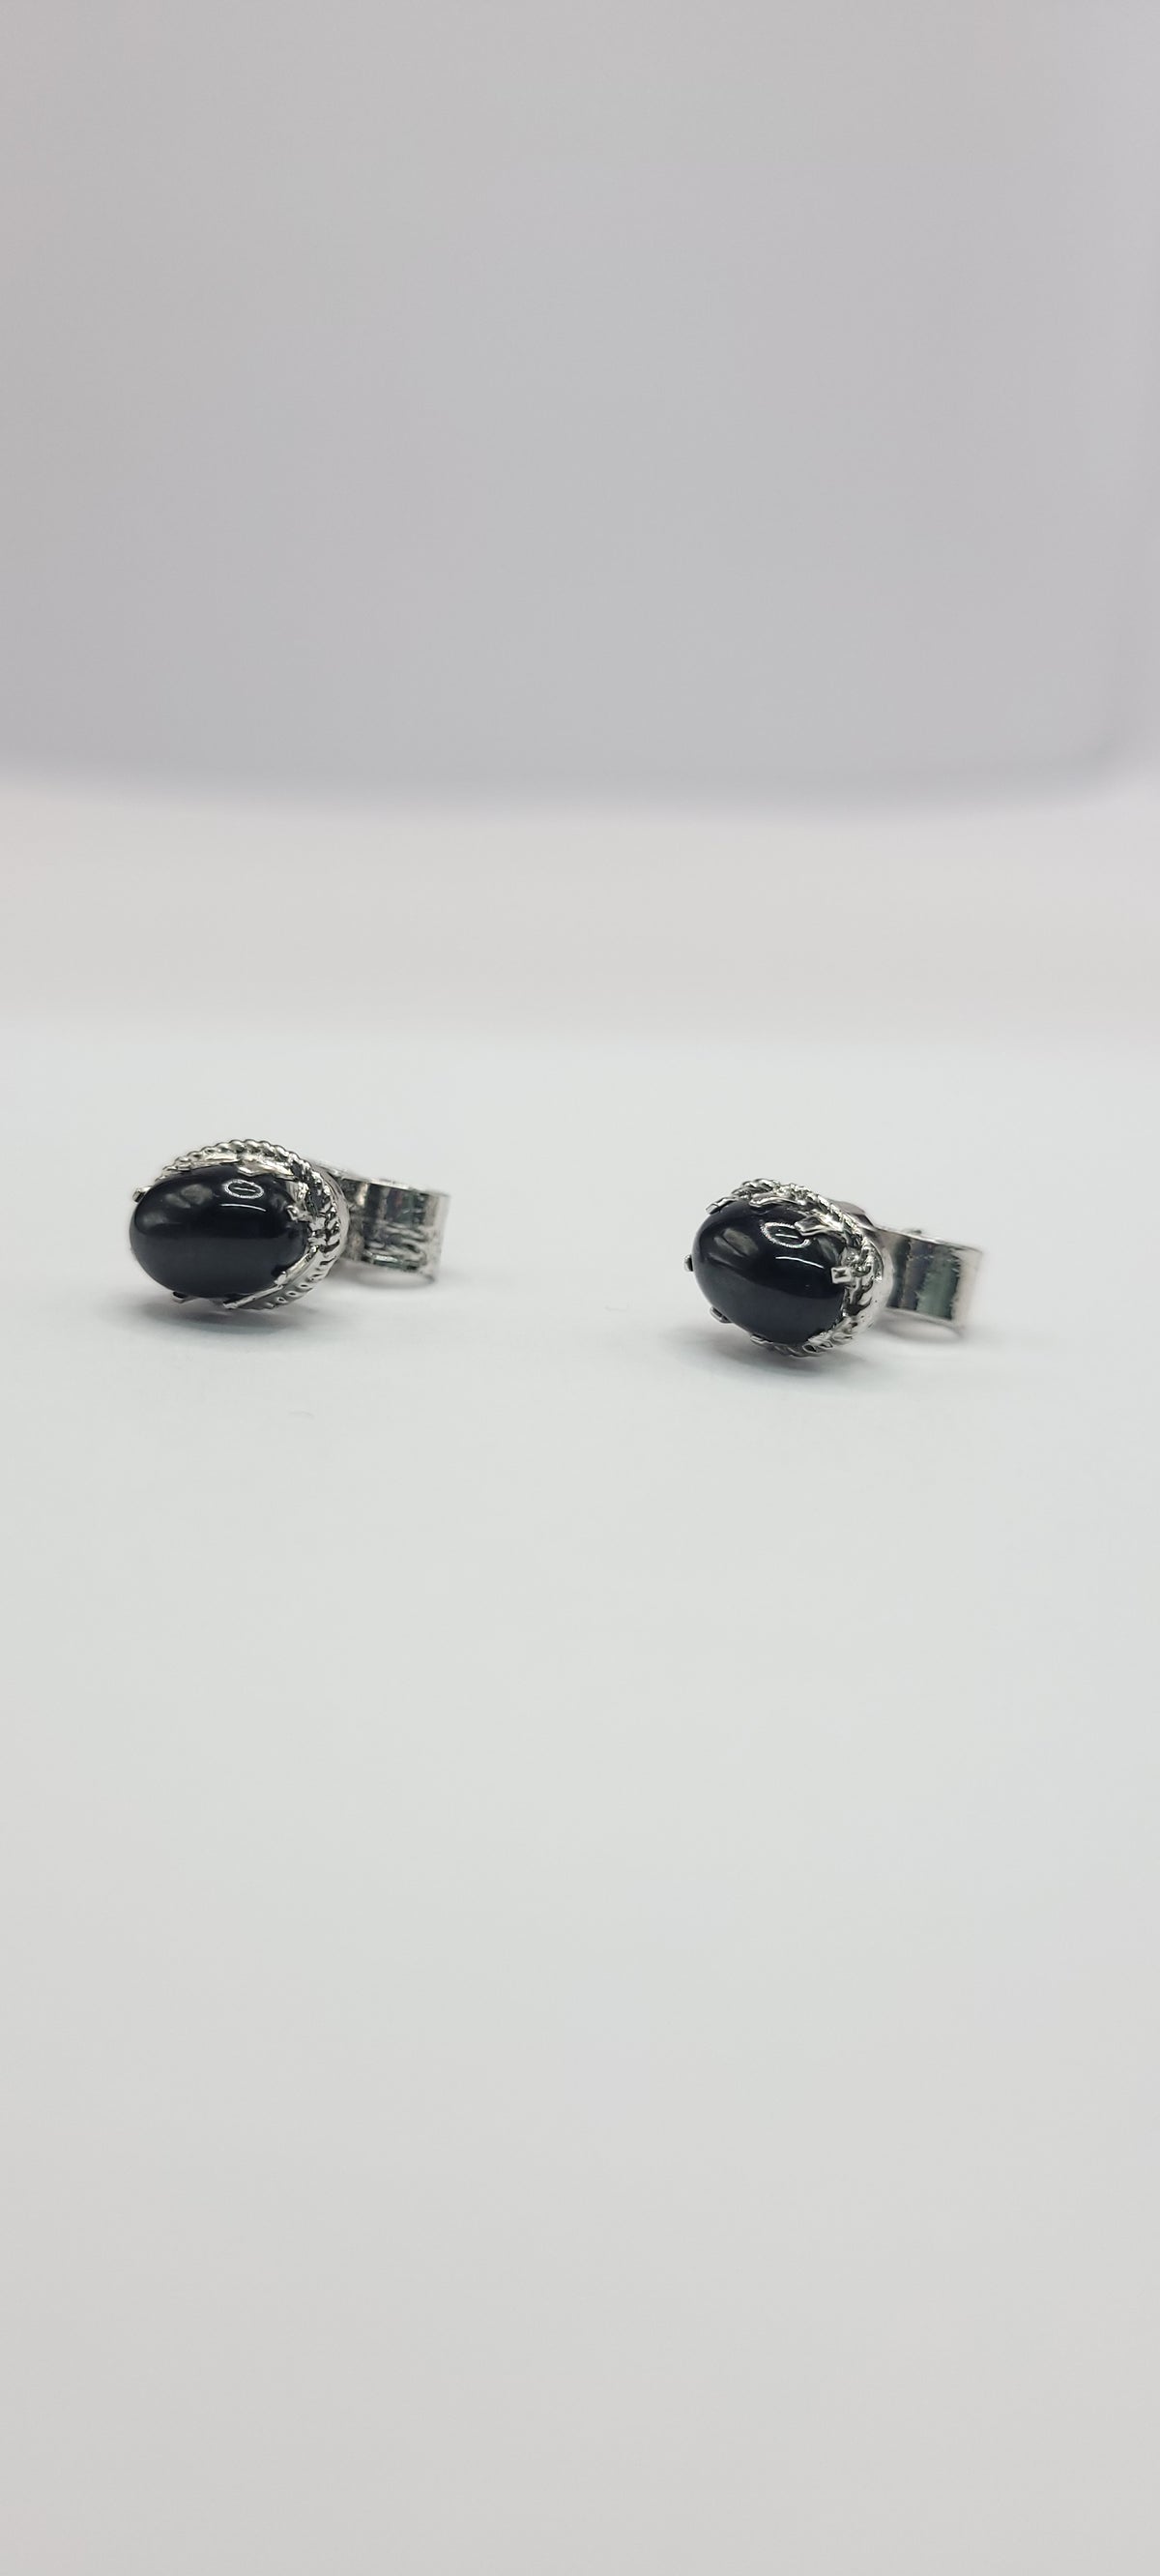 Black star stone on sterling silver studs